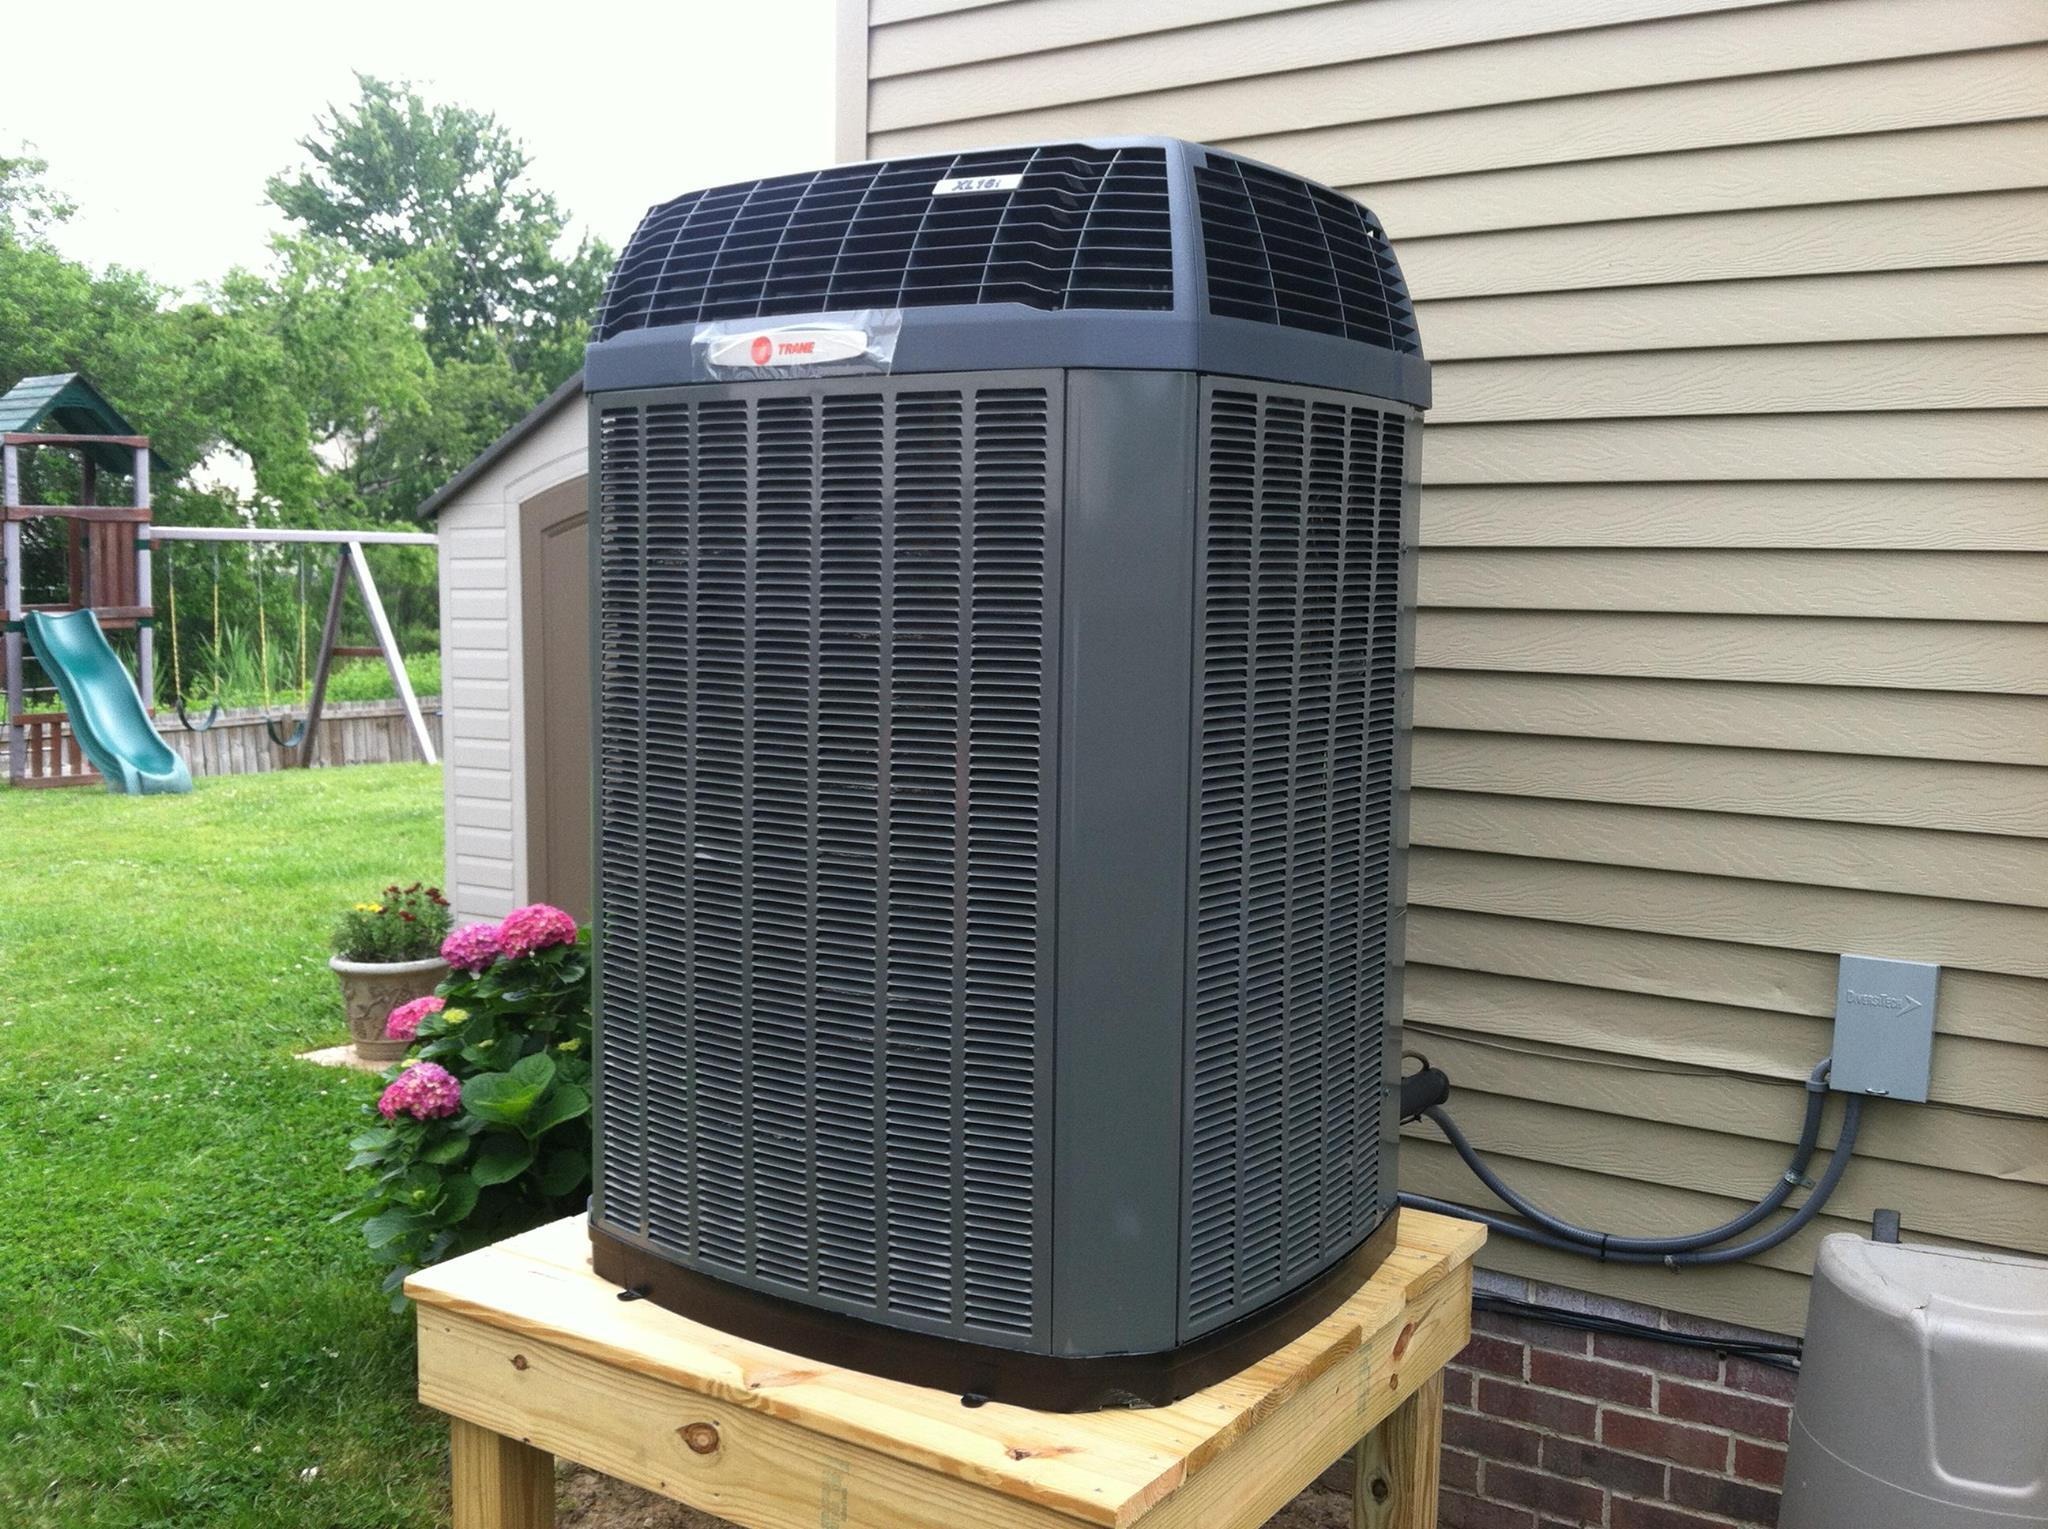 Air Conditioning & HVAC Service in Rockwall, Home